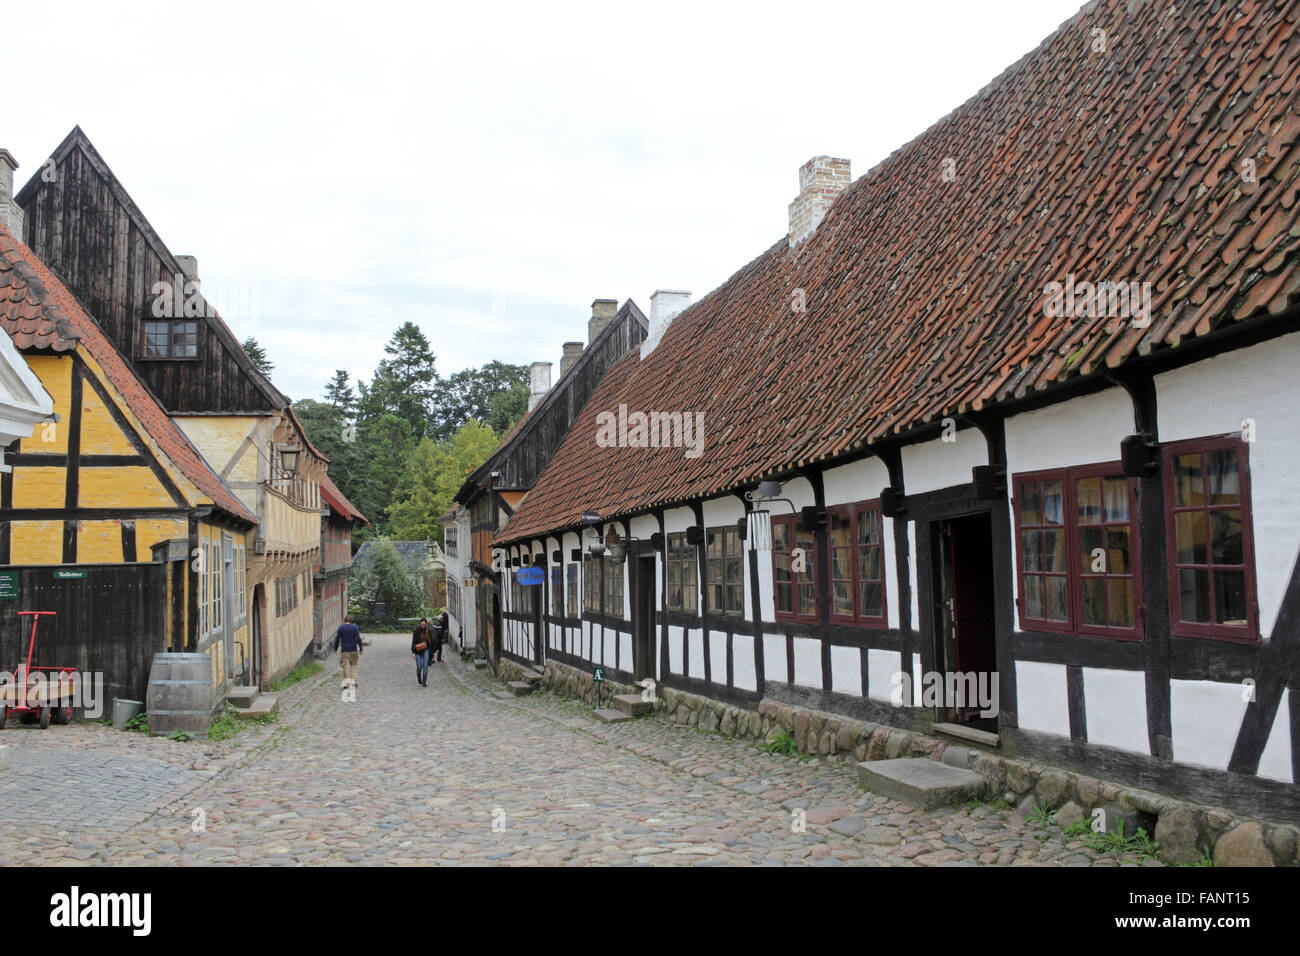 Den Gamle By - The Old Town in Aarhus, Denmark, is an open-air town museum. Stock Photo